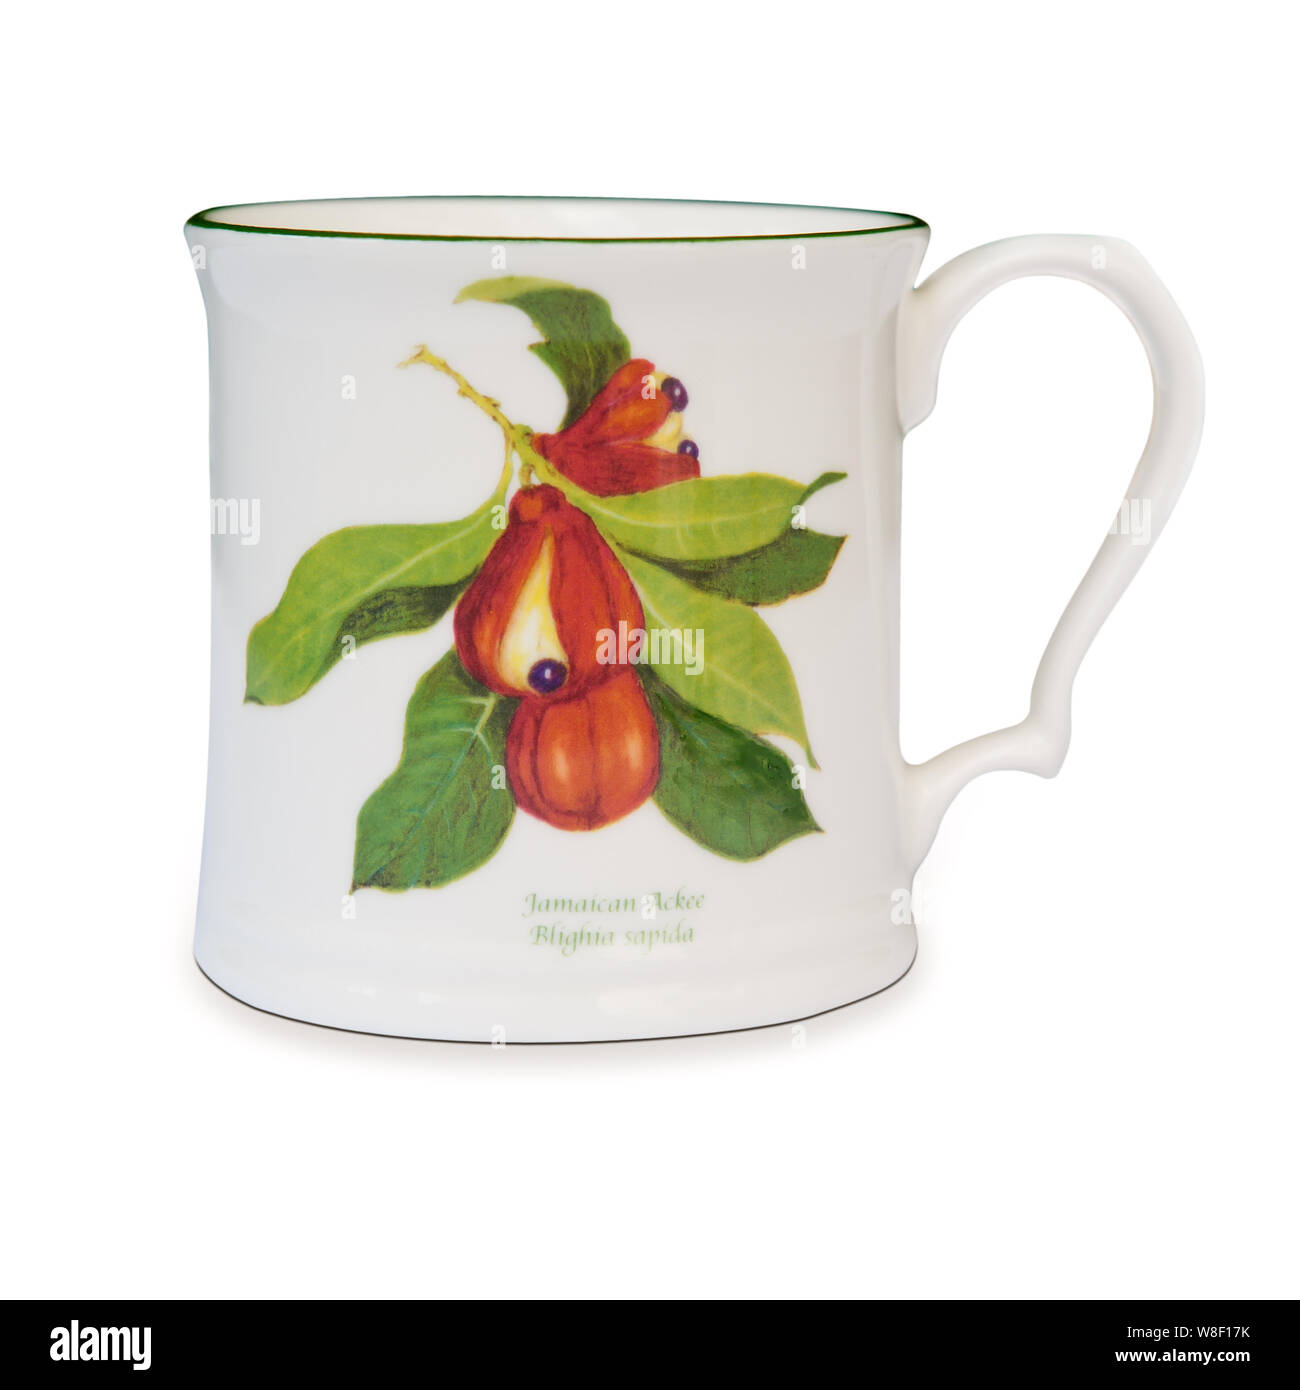 Tankard from Jenny Mein's Jamaican ackee collection Stock Photo